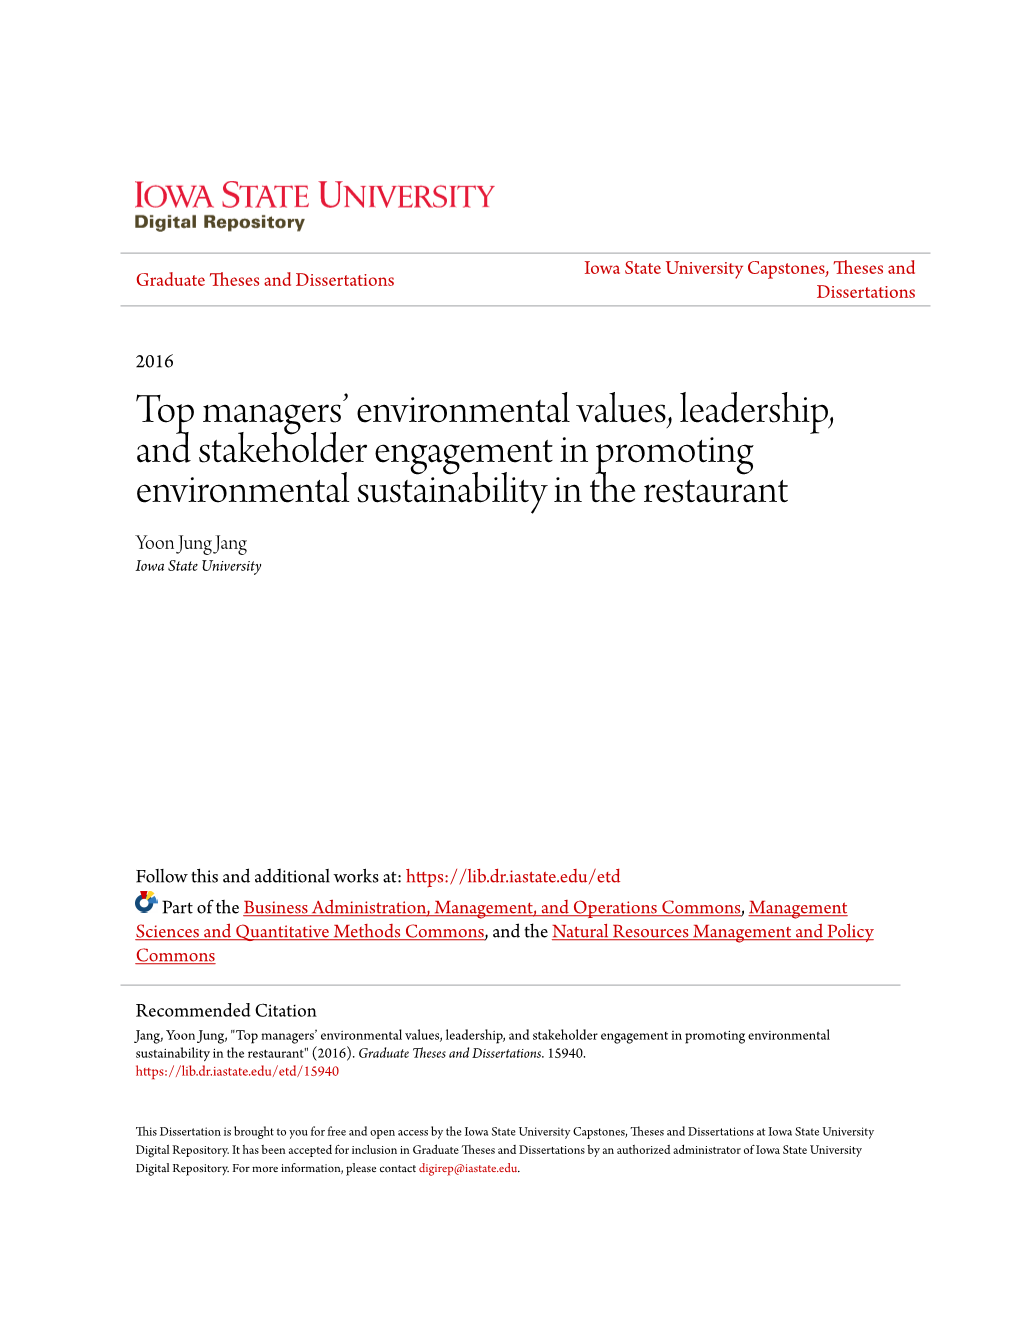 Top Managers' Environmental Values, Leadership, and Stakeholder